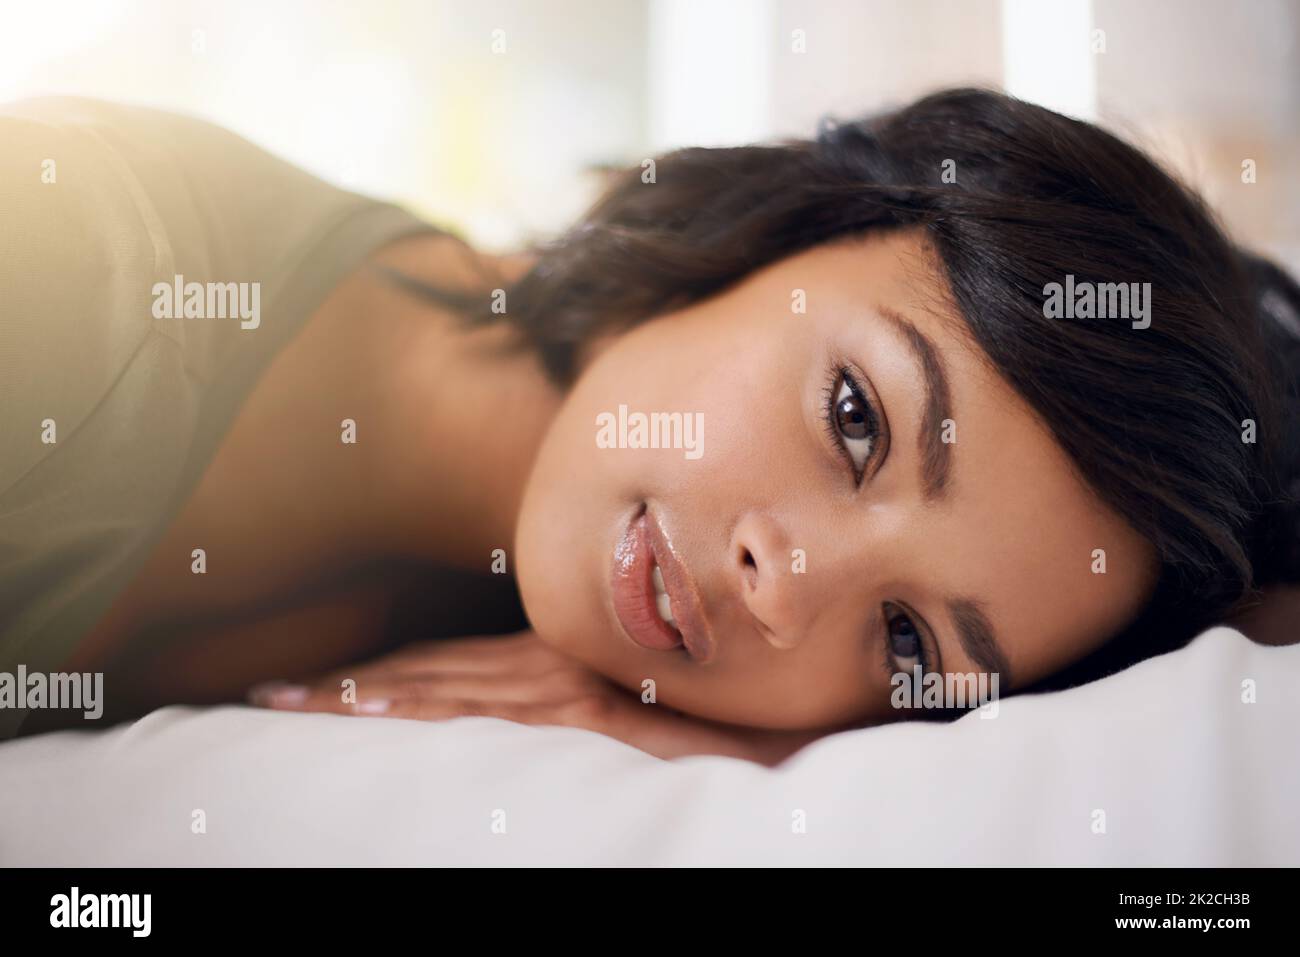 Time is precious, waste it wisely. Portrait of a young woman lying on her bed. Stock Photo